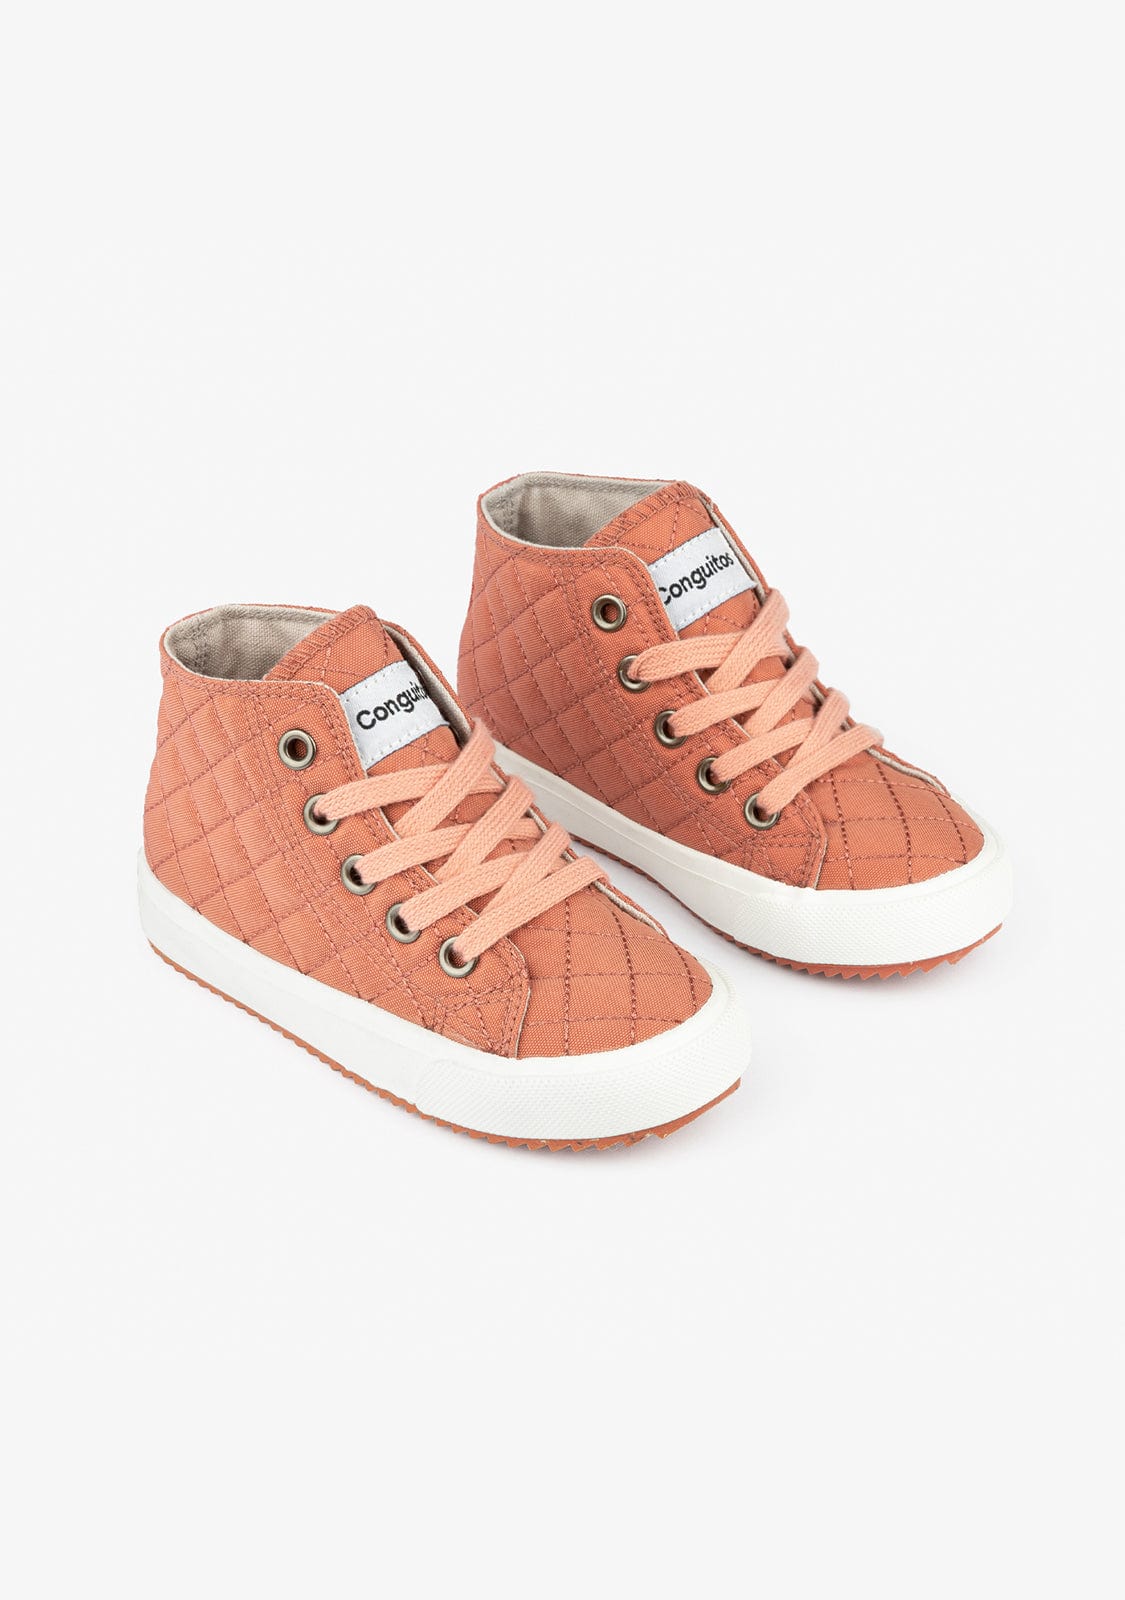 CONGUITOS Shoes Child's Pink Quilted Hi-Top Sneakers